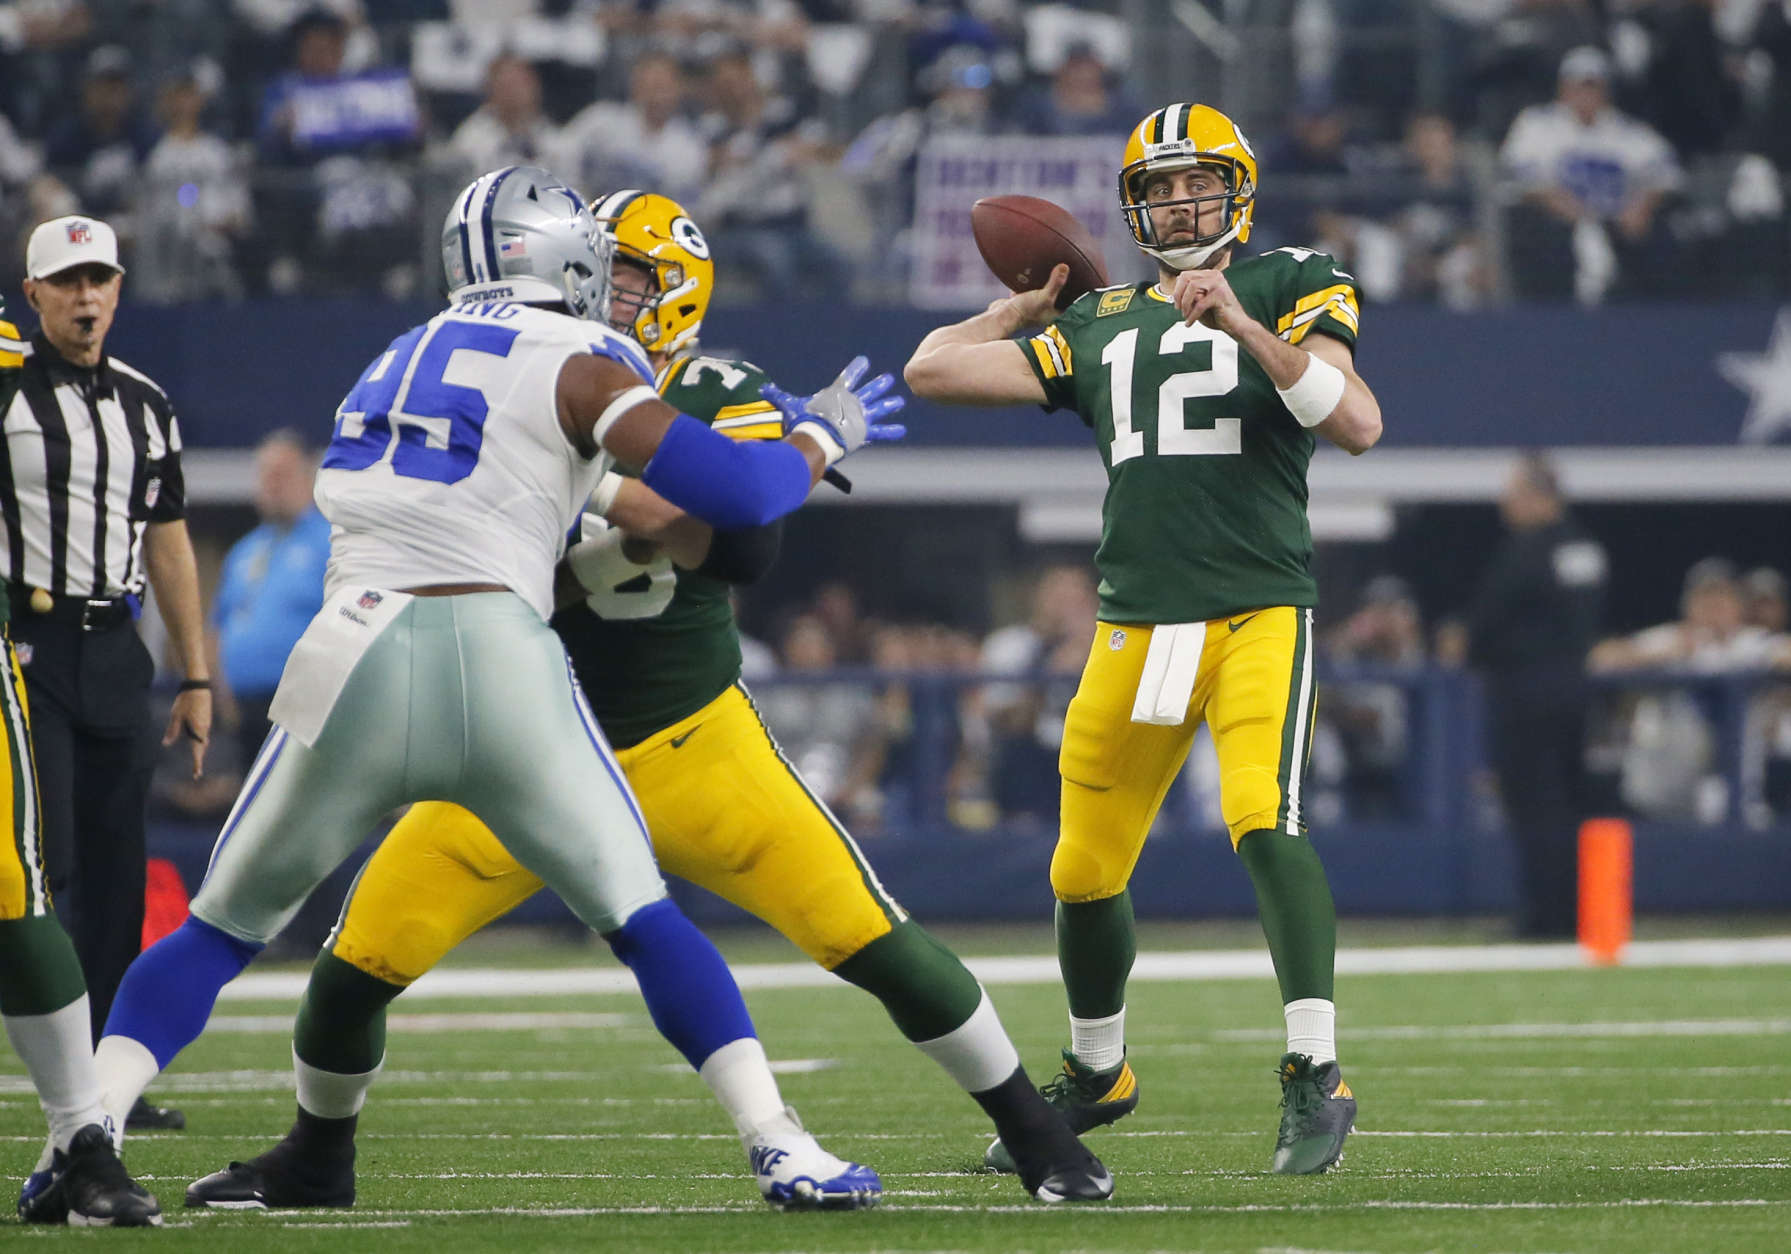 Green Bay Packers' Aaron Rodgers throws during the first half of an NFL divisional playoff football game against the Dallas Cowboys Sunday, Jan. 15, 2017, in Arlington, Texas. (AP Photo/Tony Gutierrez)